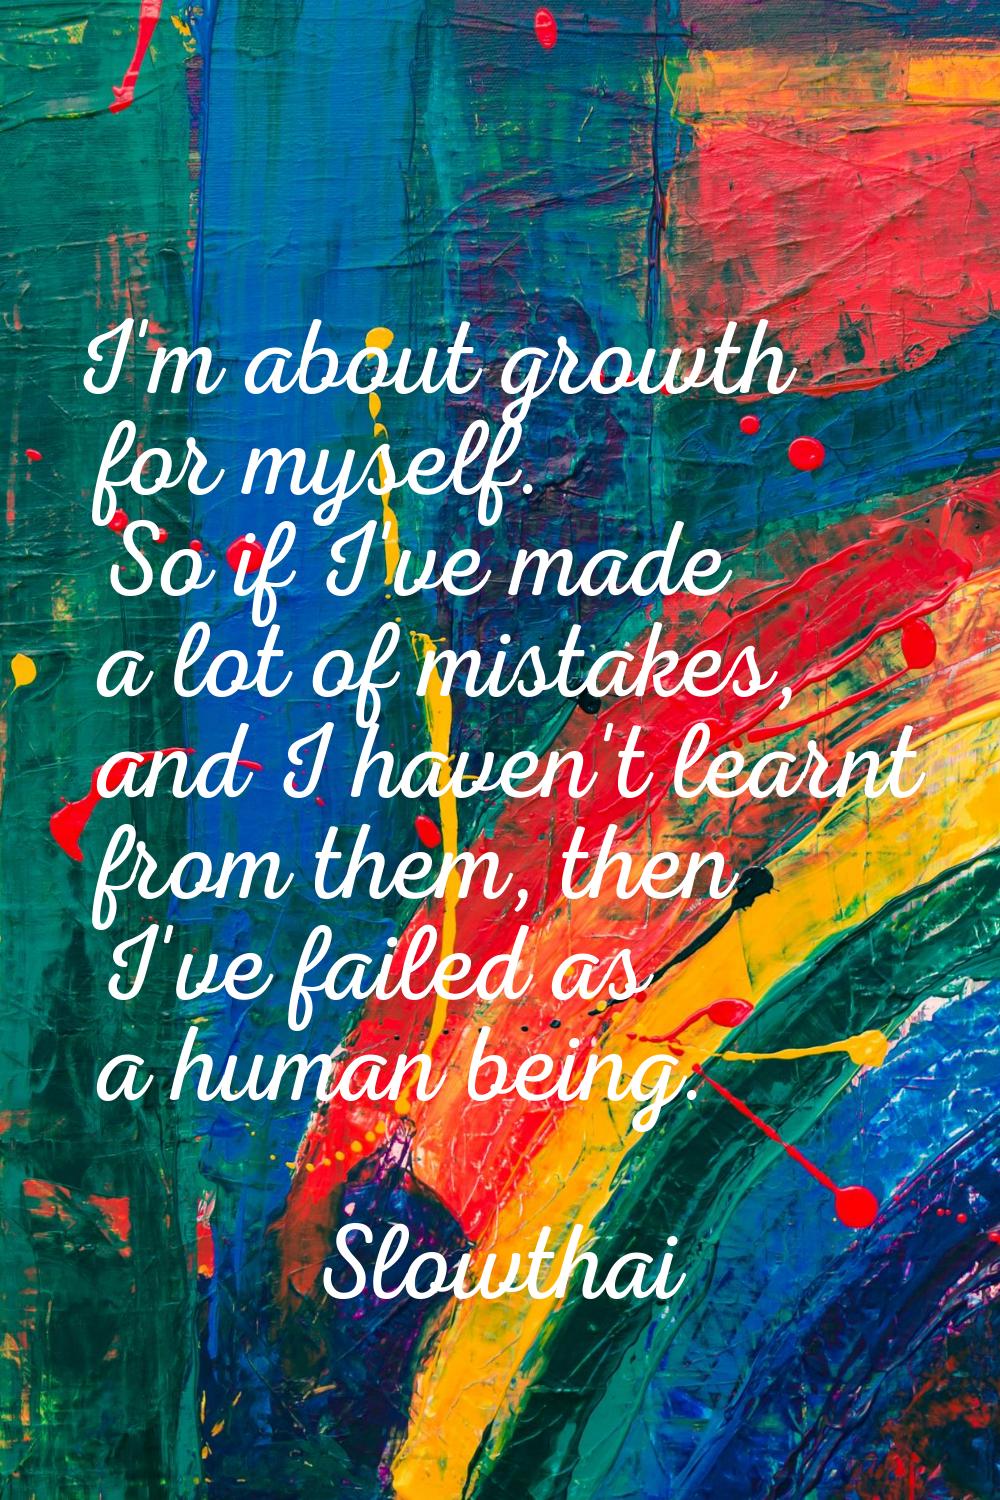 I'm about growth for myself. So if I've made a lot of mistakes, and I haven't learnt from them, the